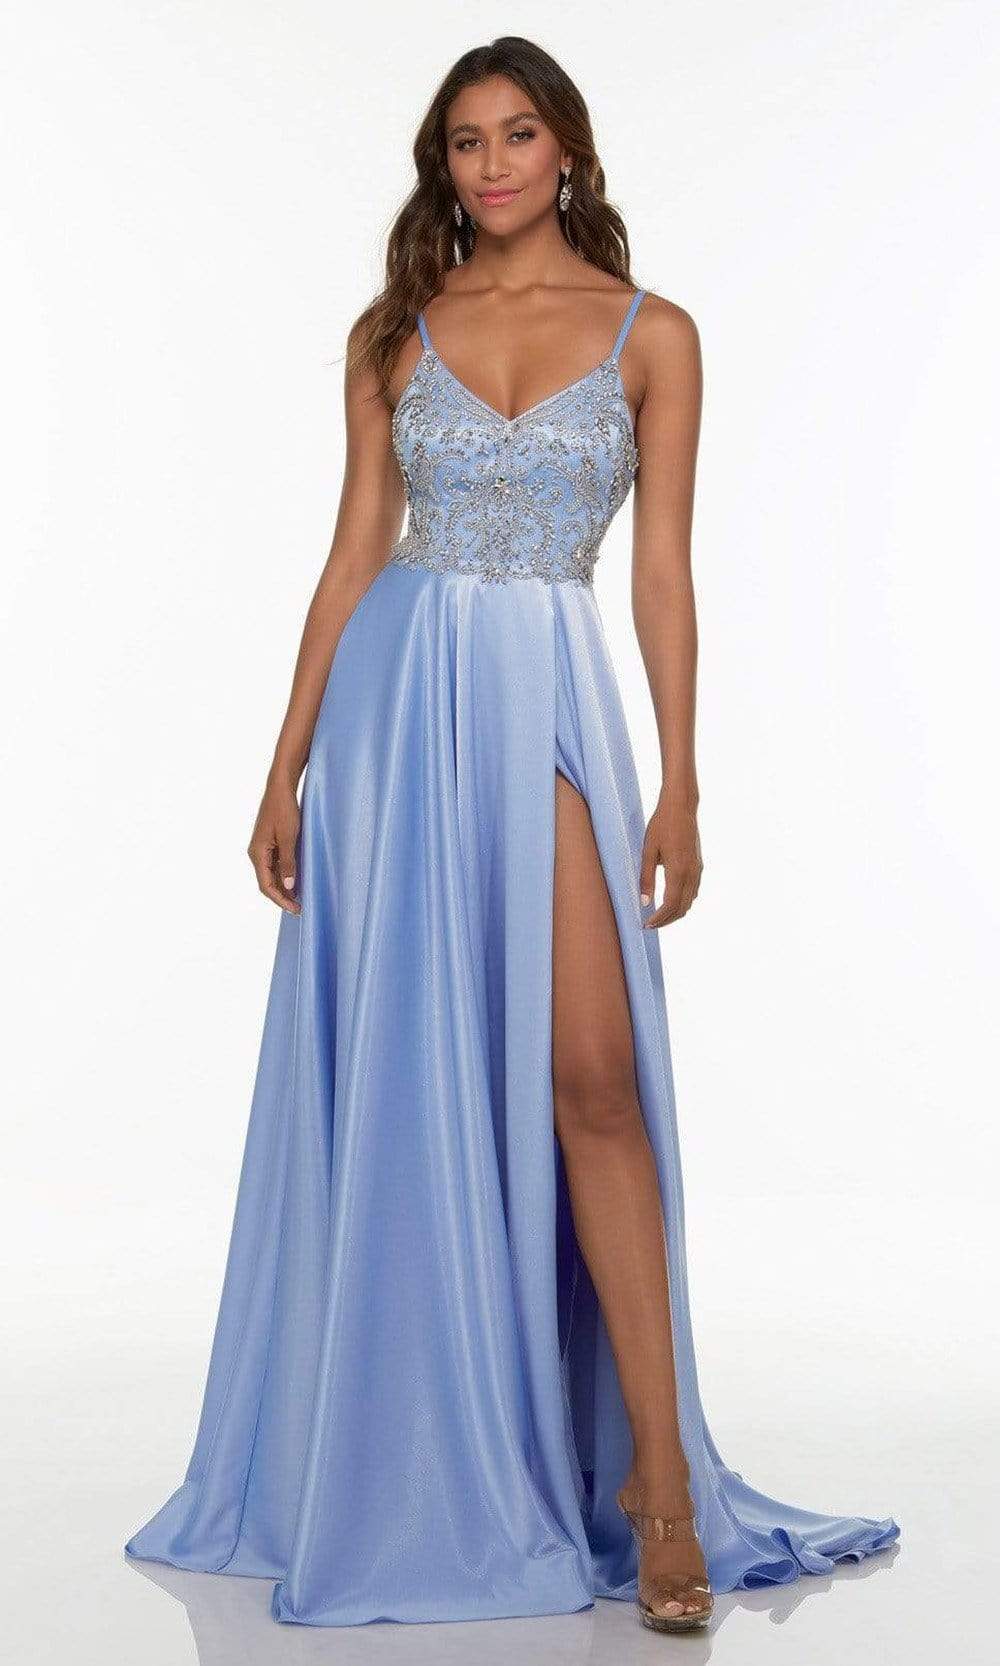 Alyce Paris - 61142 Bejeweled V-Neck Gown Special Occasion Dress 000 / Light Periwinkle